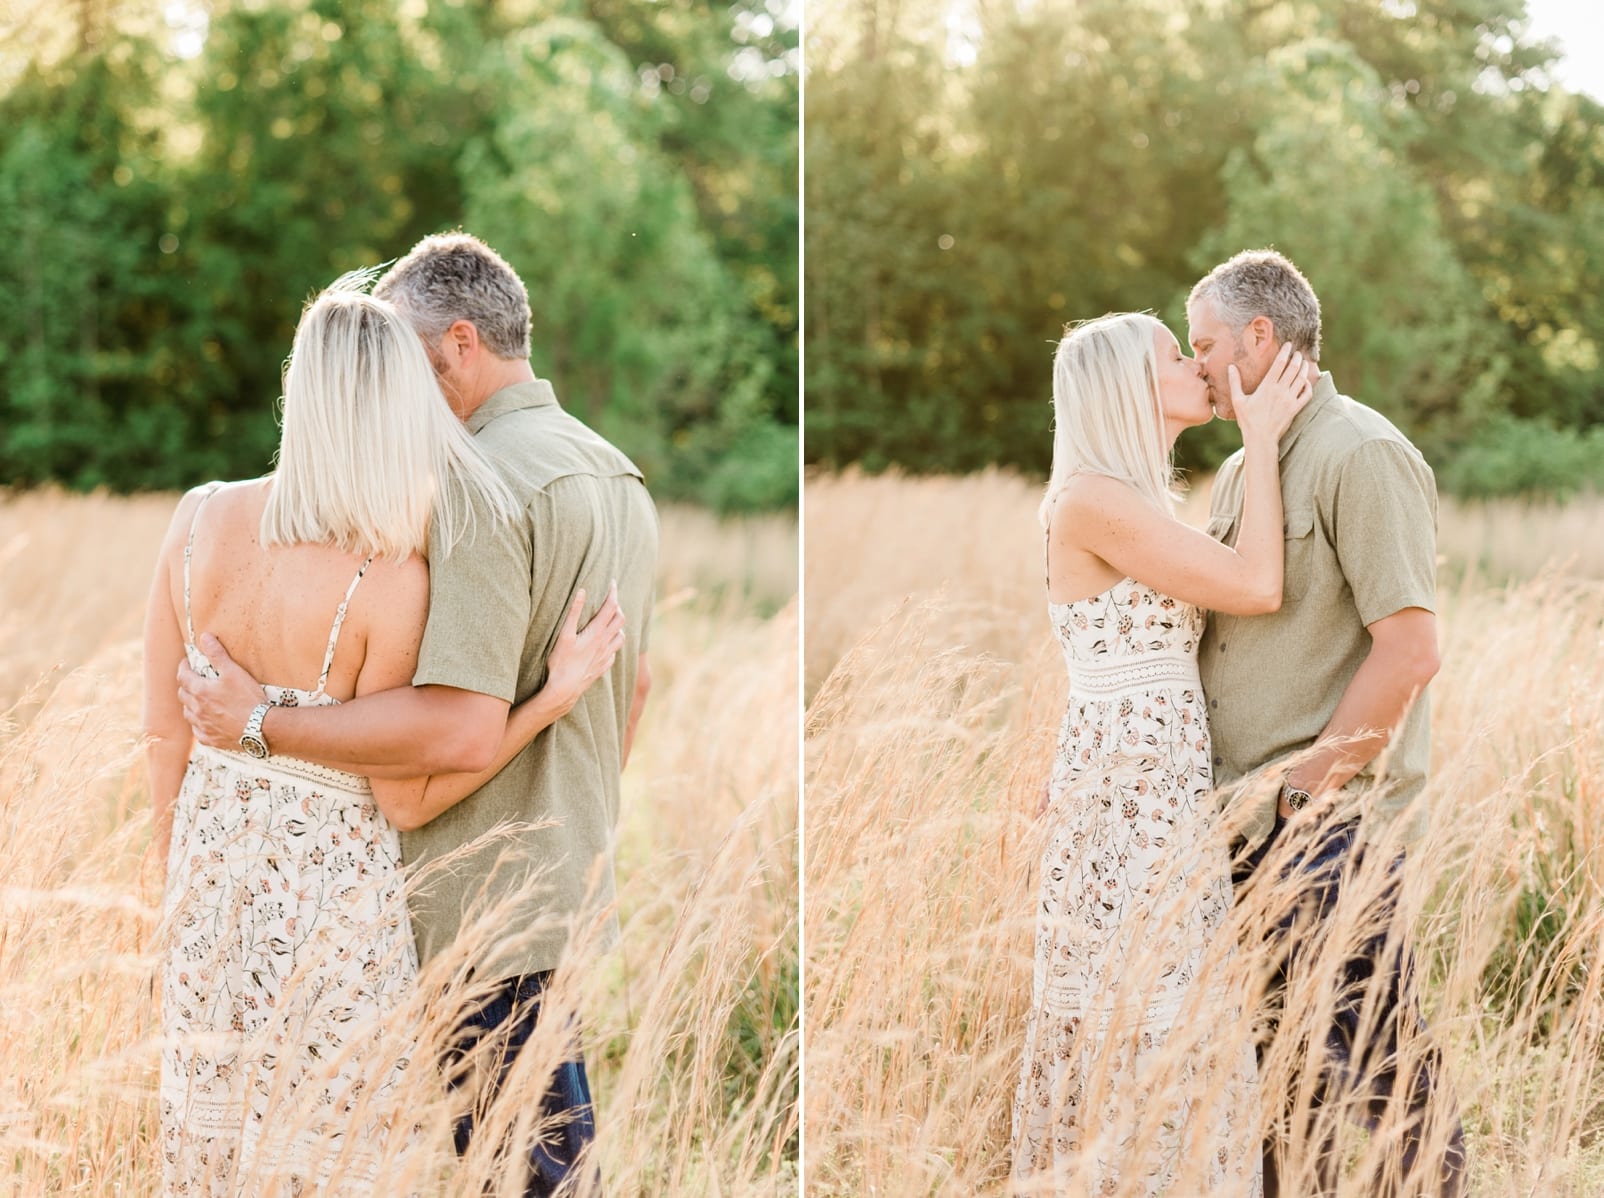 Raleigh couple embracing at sunset in a wheat field photo